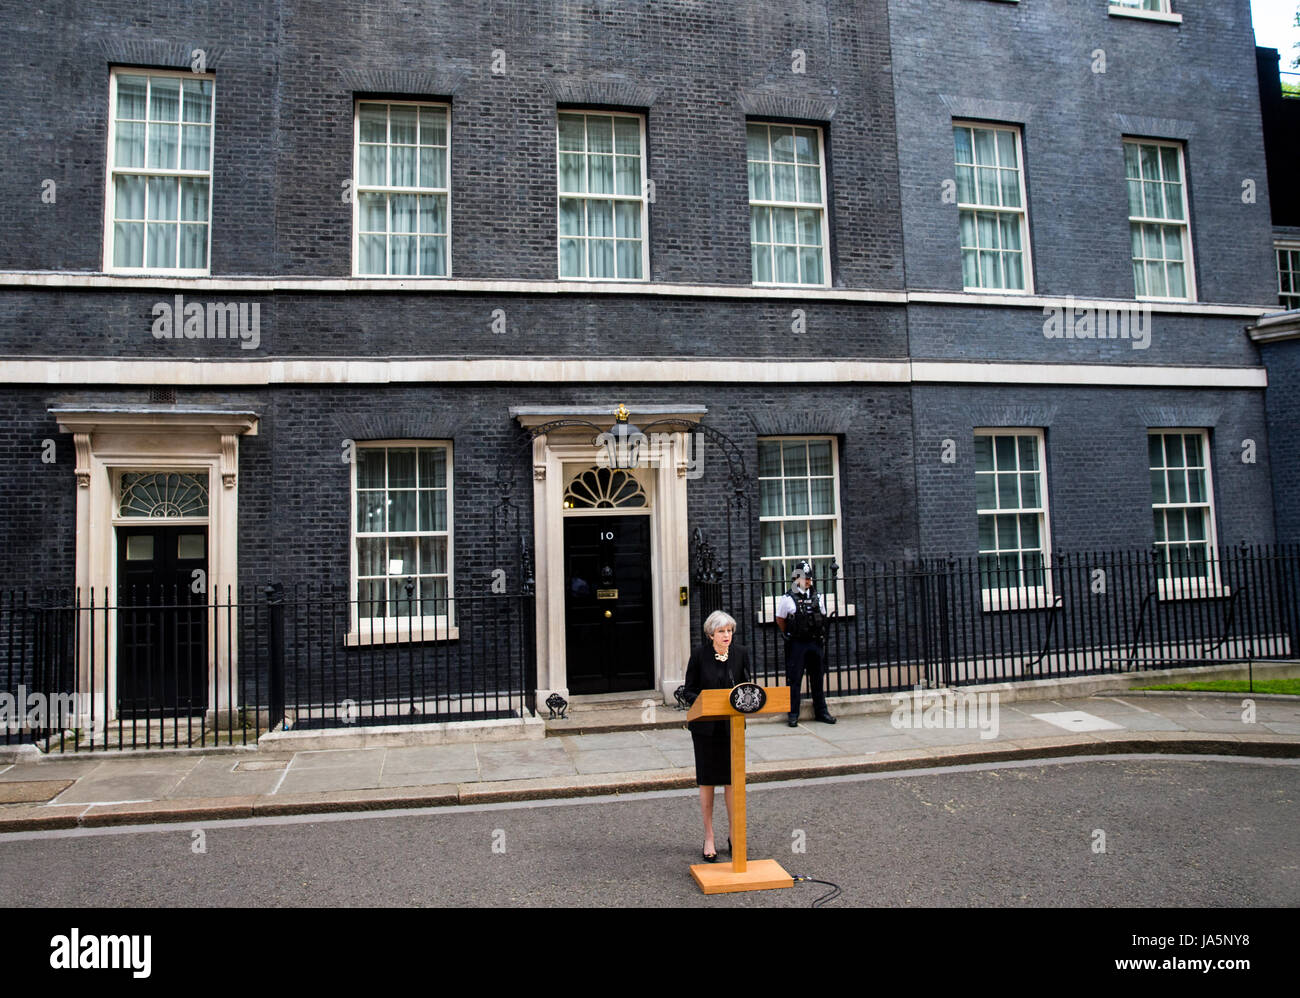 Prime Minister, Theresa May, makes a statement about security in Downing street following the June 3rd terror attack at London Bridge Stock Photo